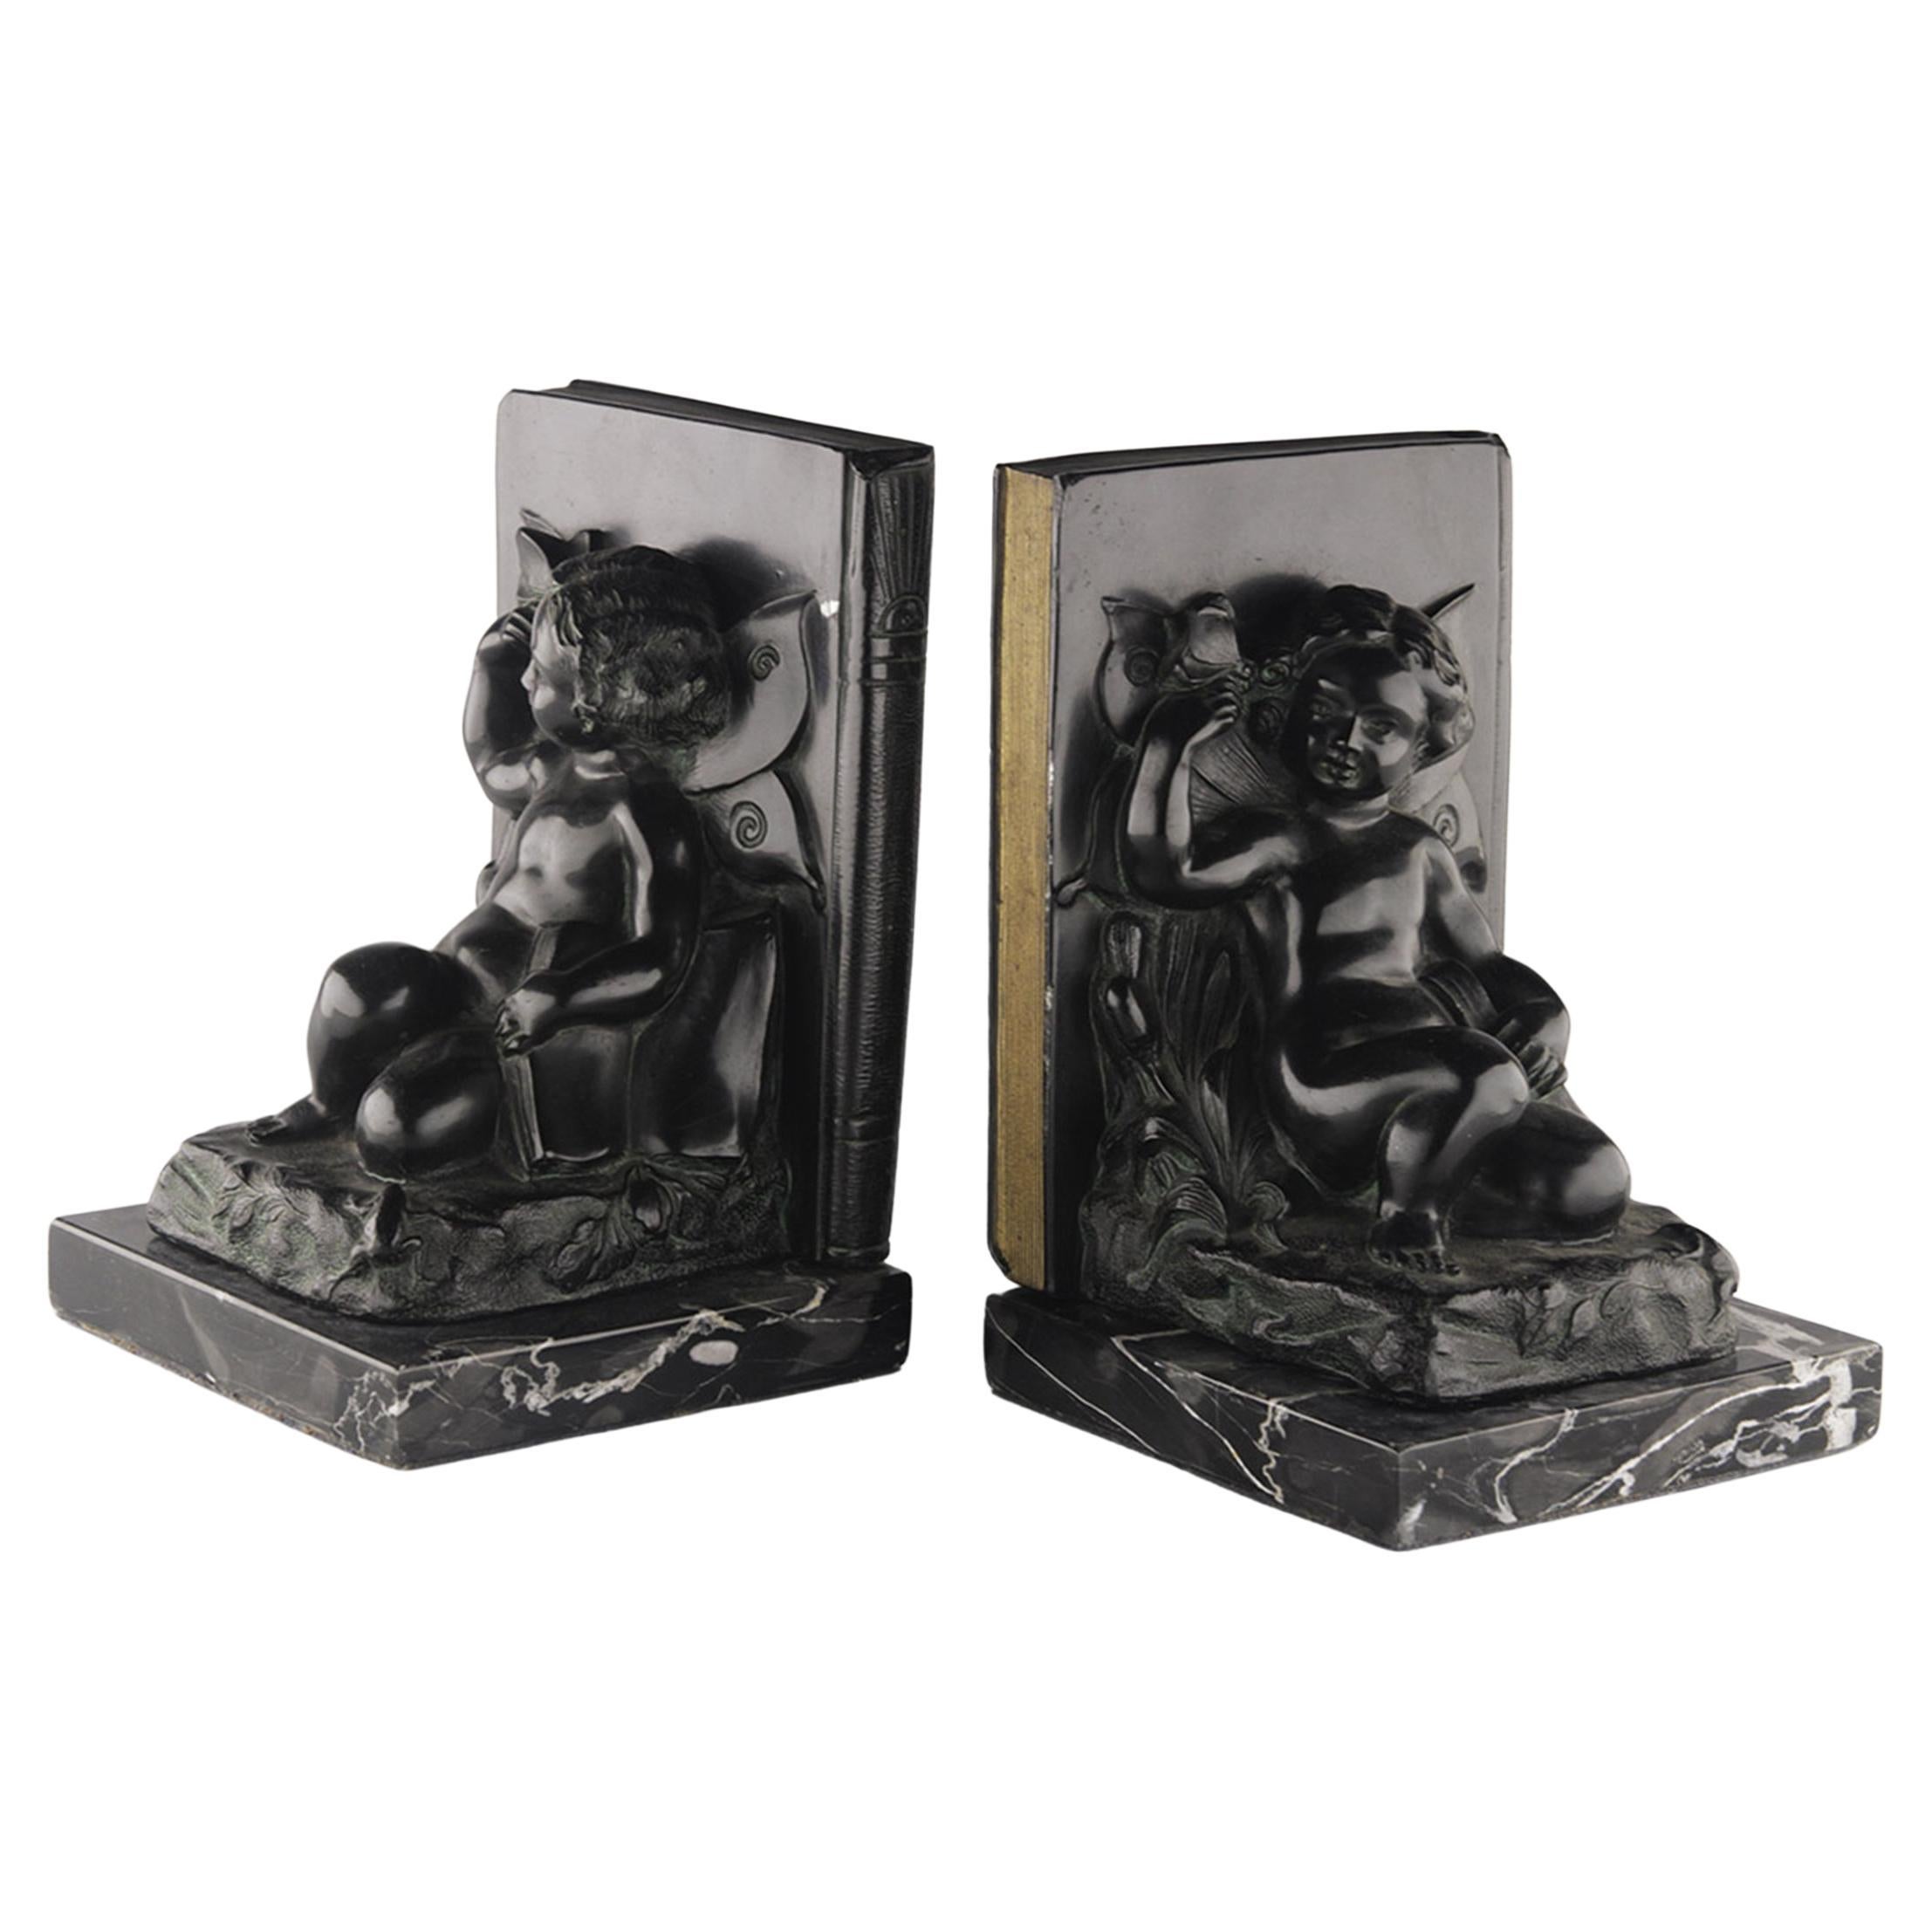 Set of French Art Déco Zamac Winged Cherub/Fairy Child Bookends with Marble Base